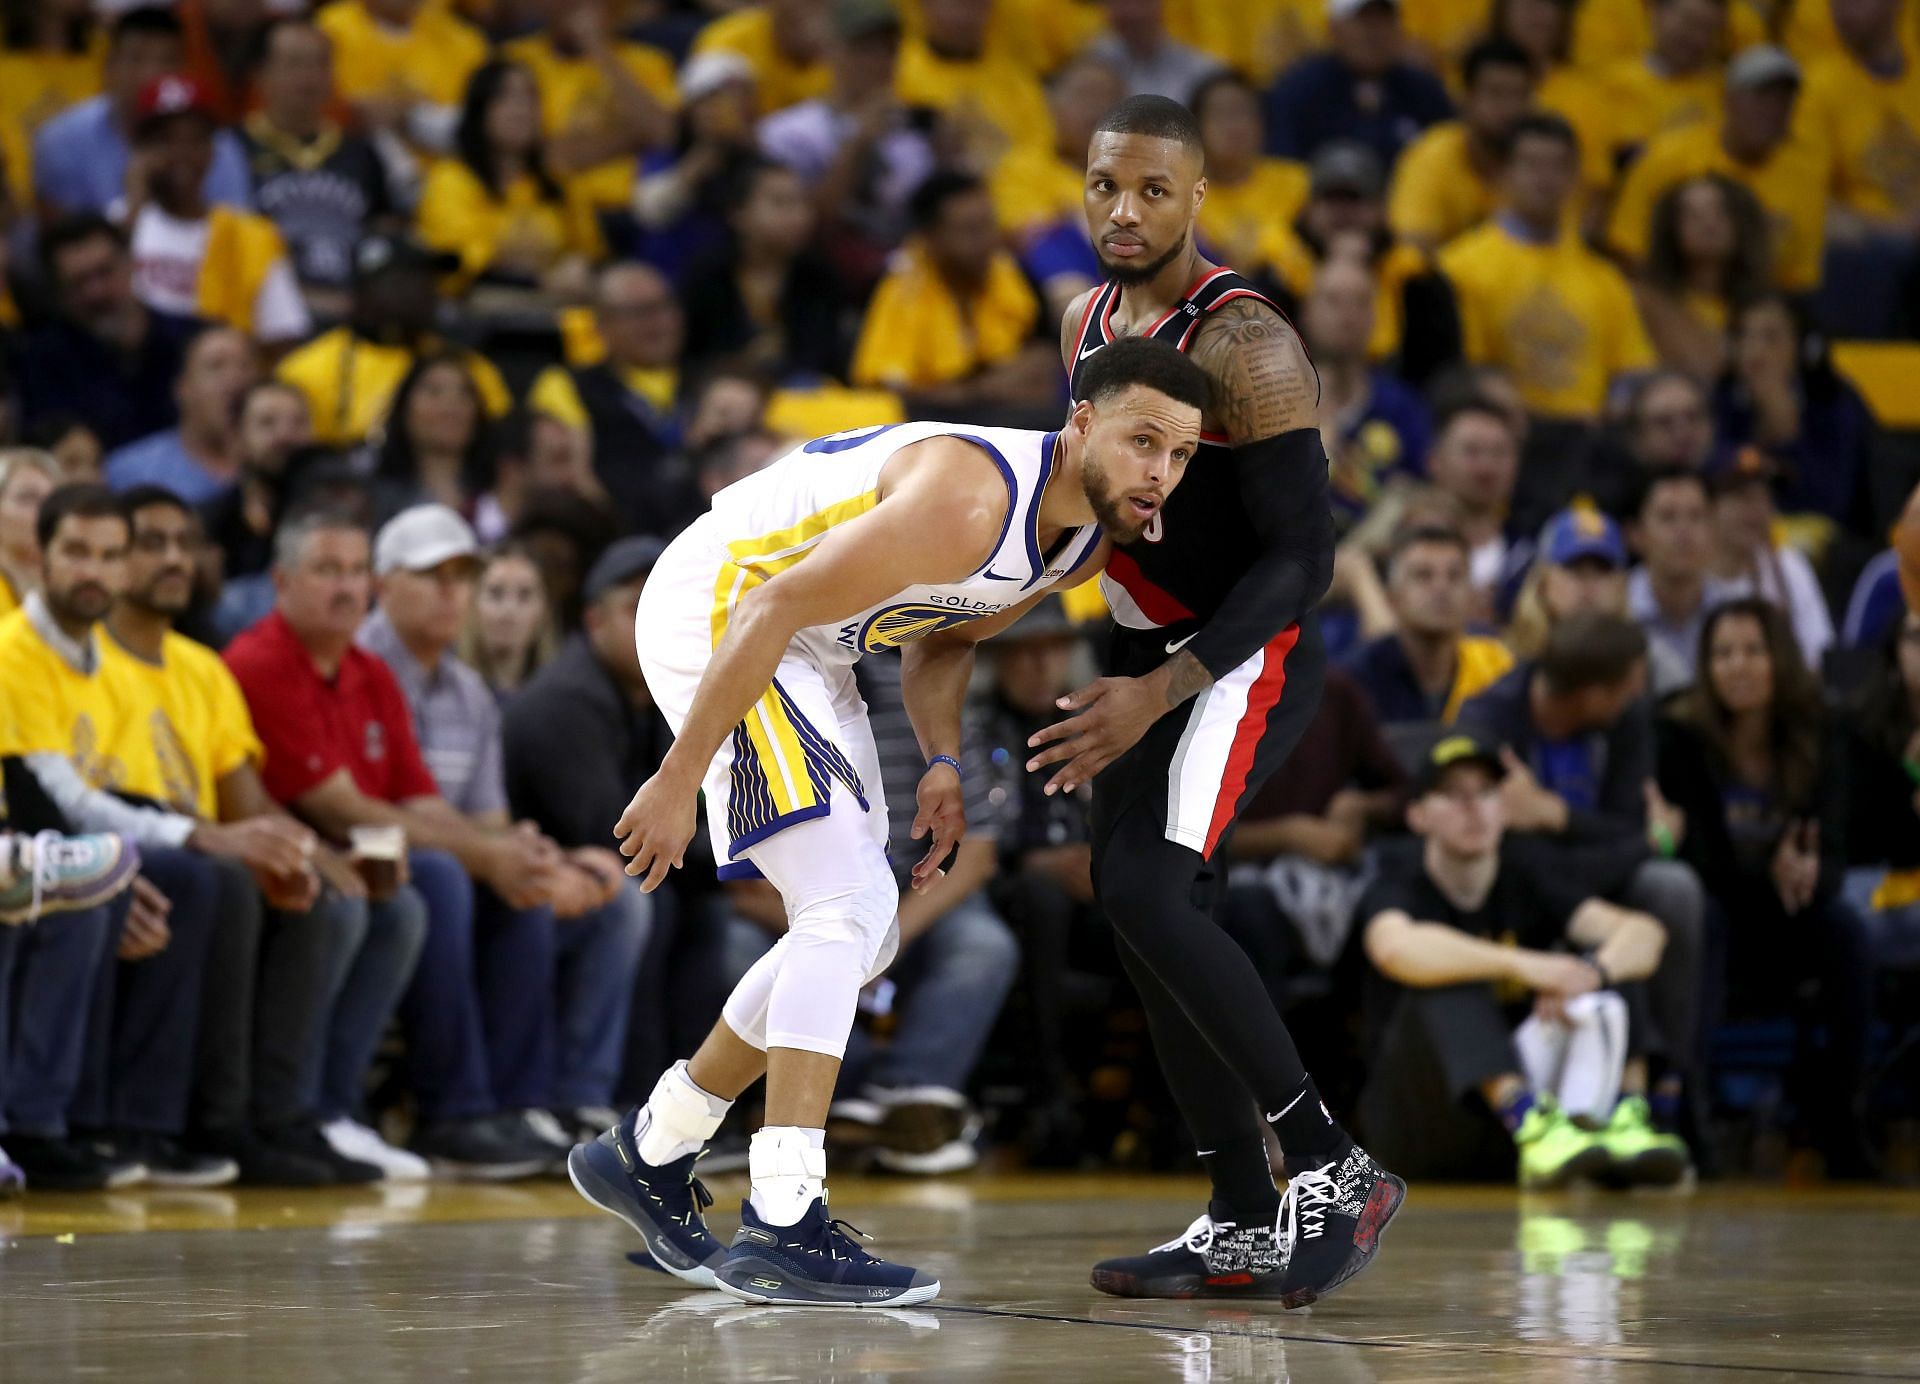 Stephen Curry #30 of the Golden State Warriors matching up against Damian Lillard #0 of the Portland Trail Blazers